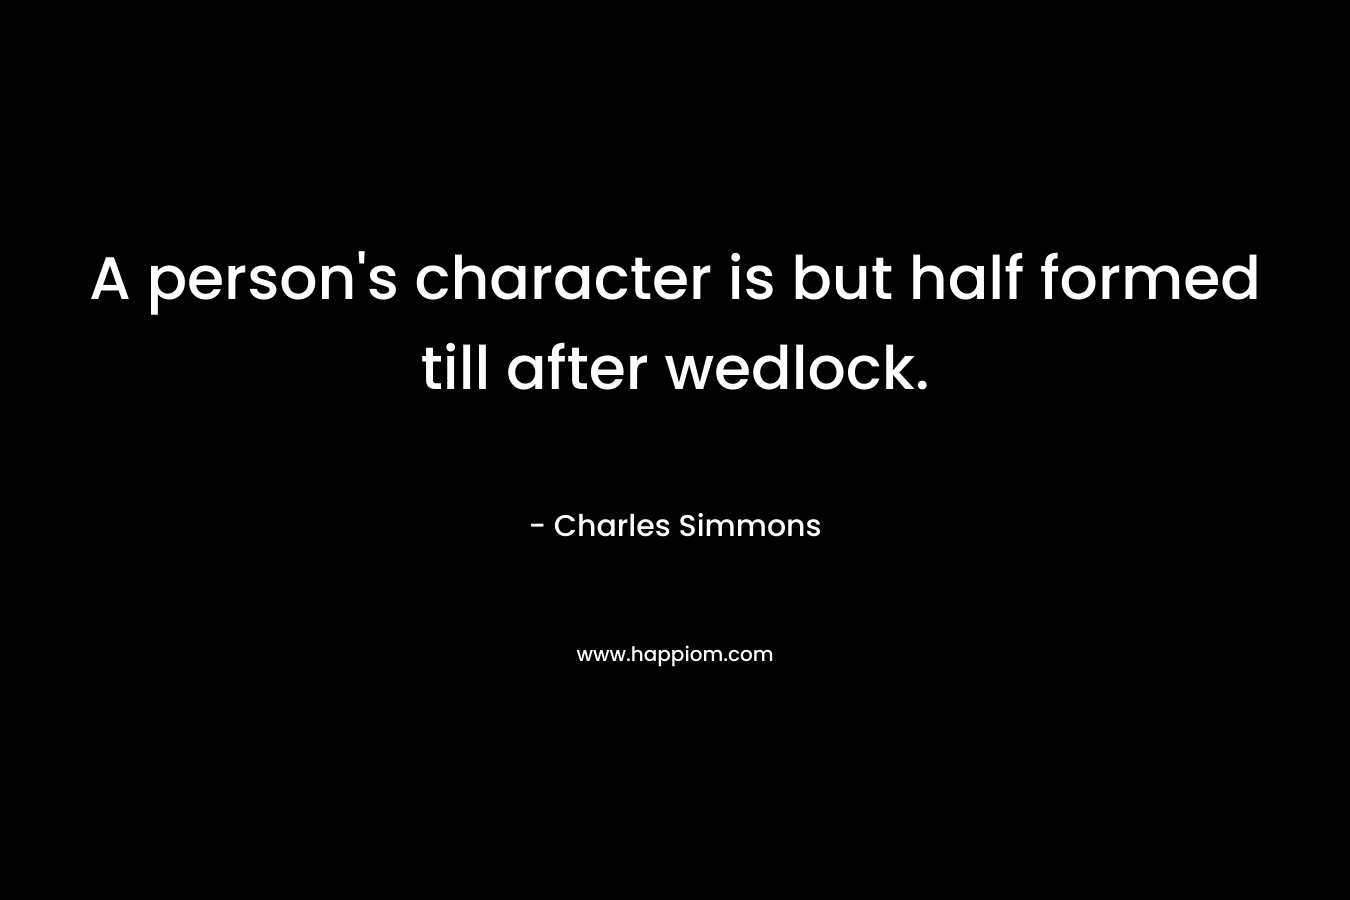 A person's character is but half formed till after wedlock.